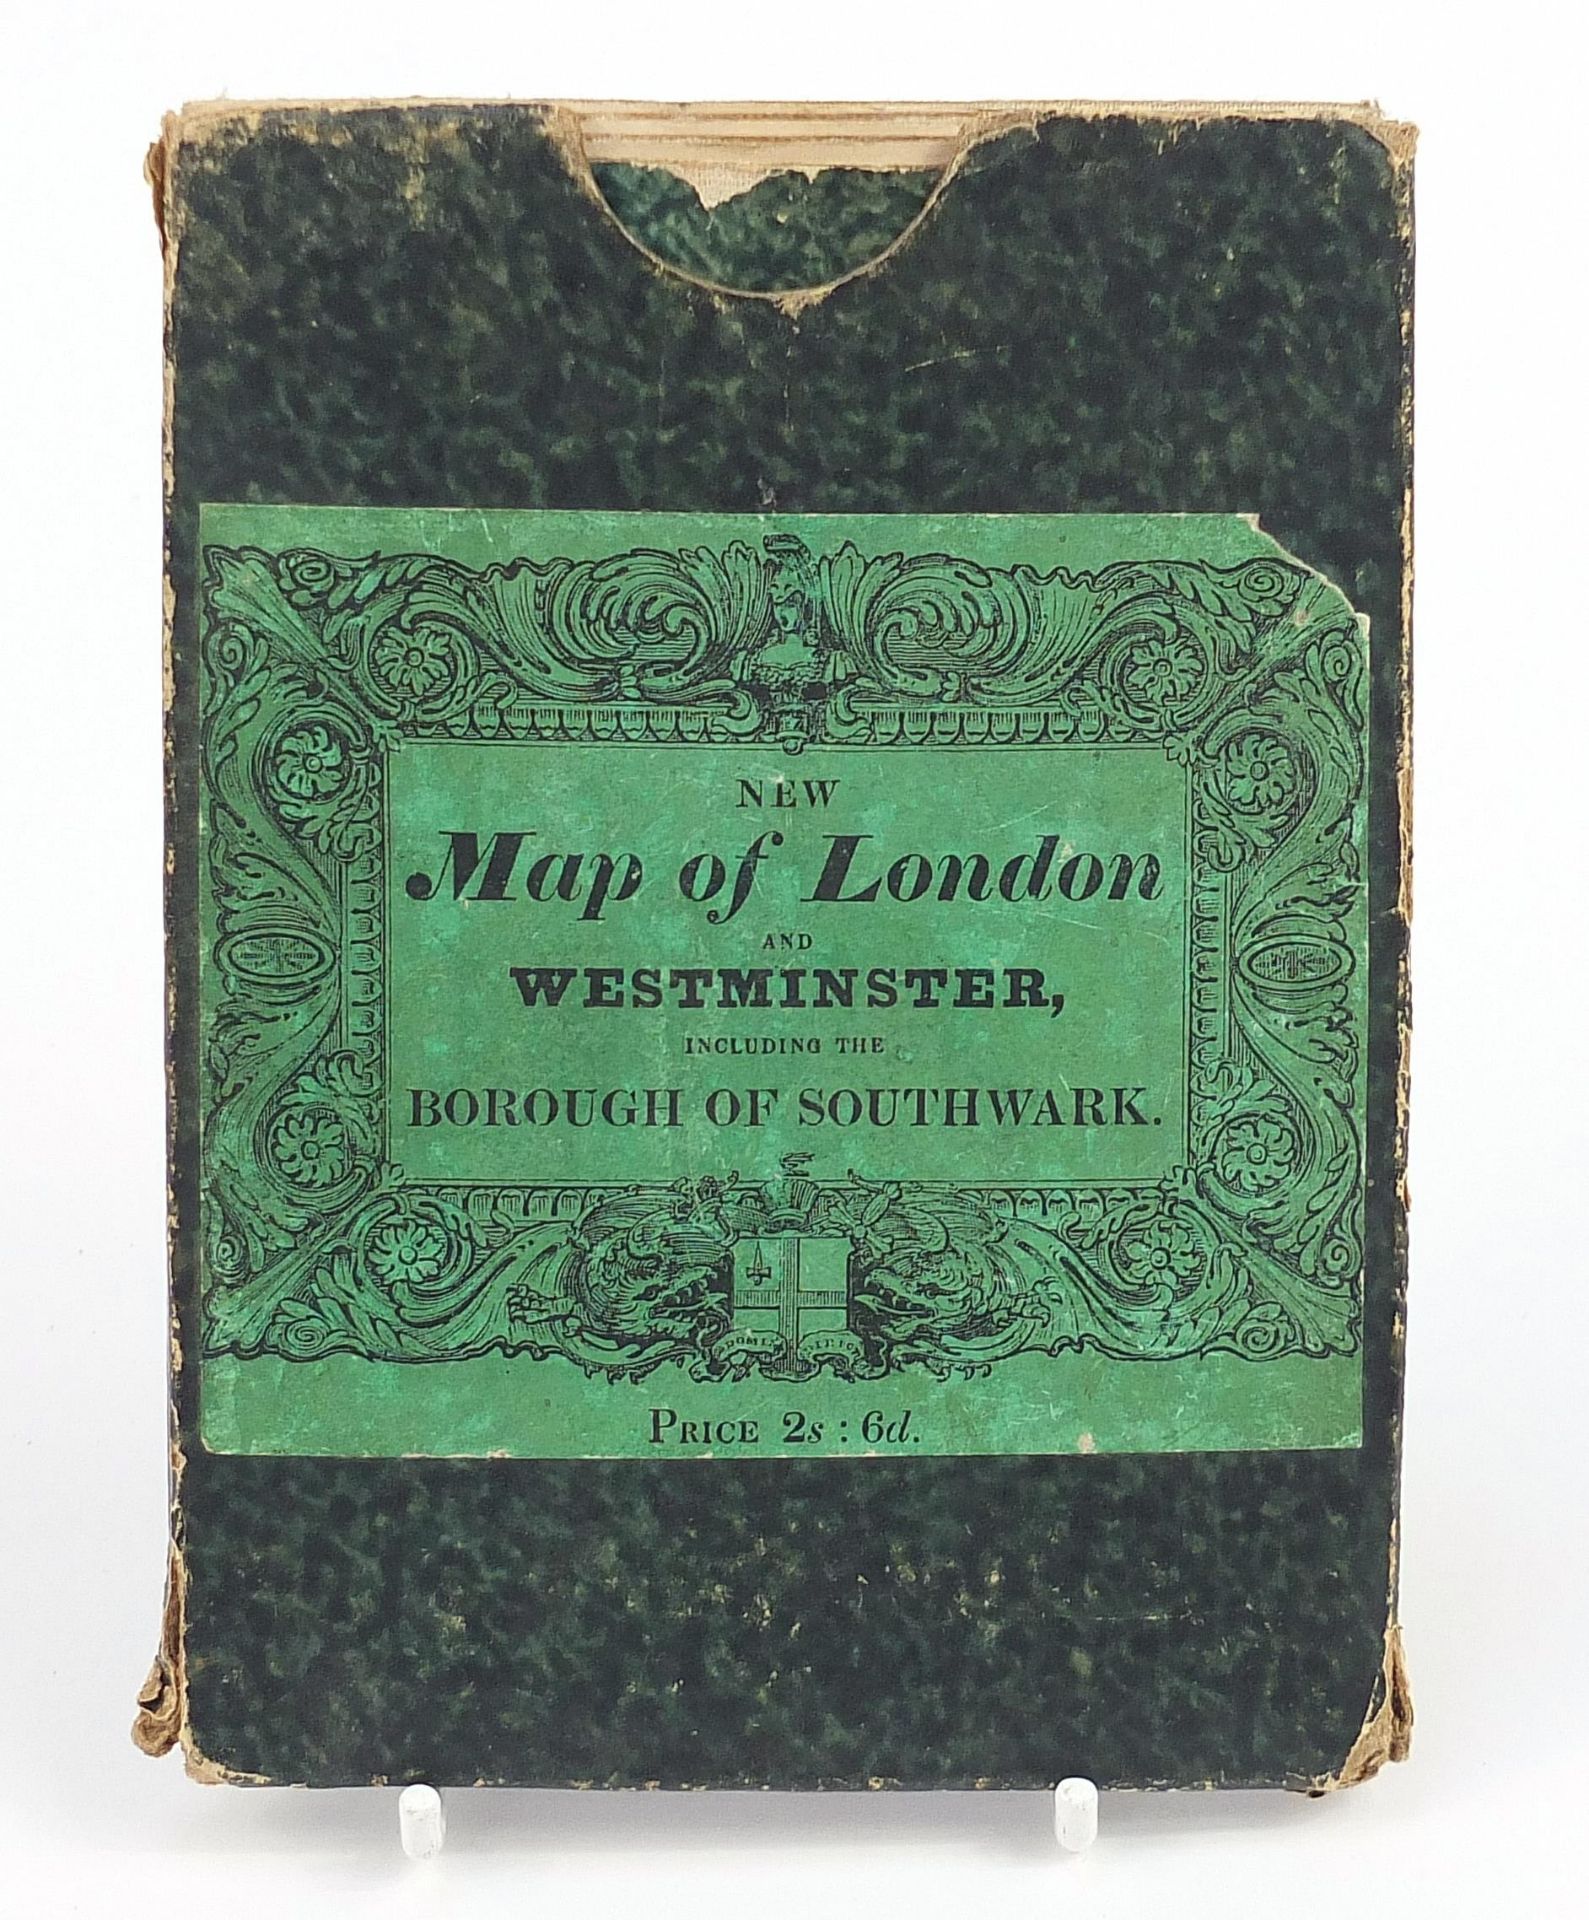 19th century canvas backed folding map of London & Westminster, published London TT & J Tegg, the - Image 4 of 4